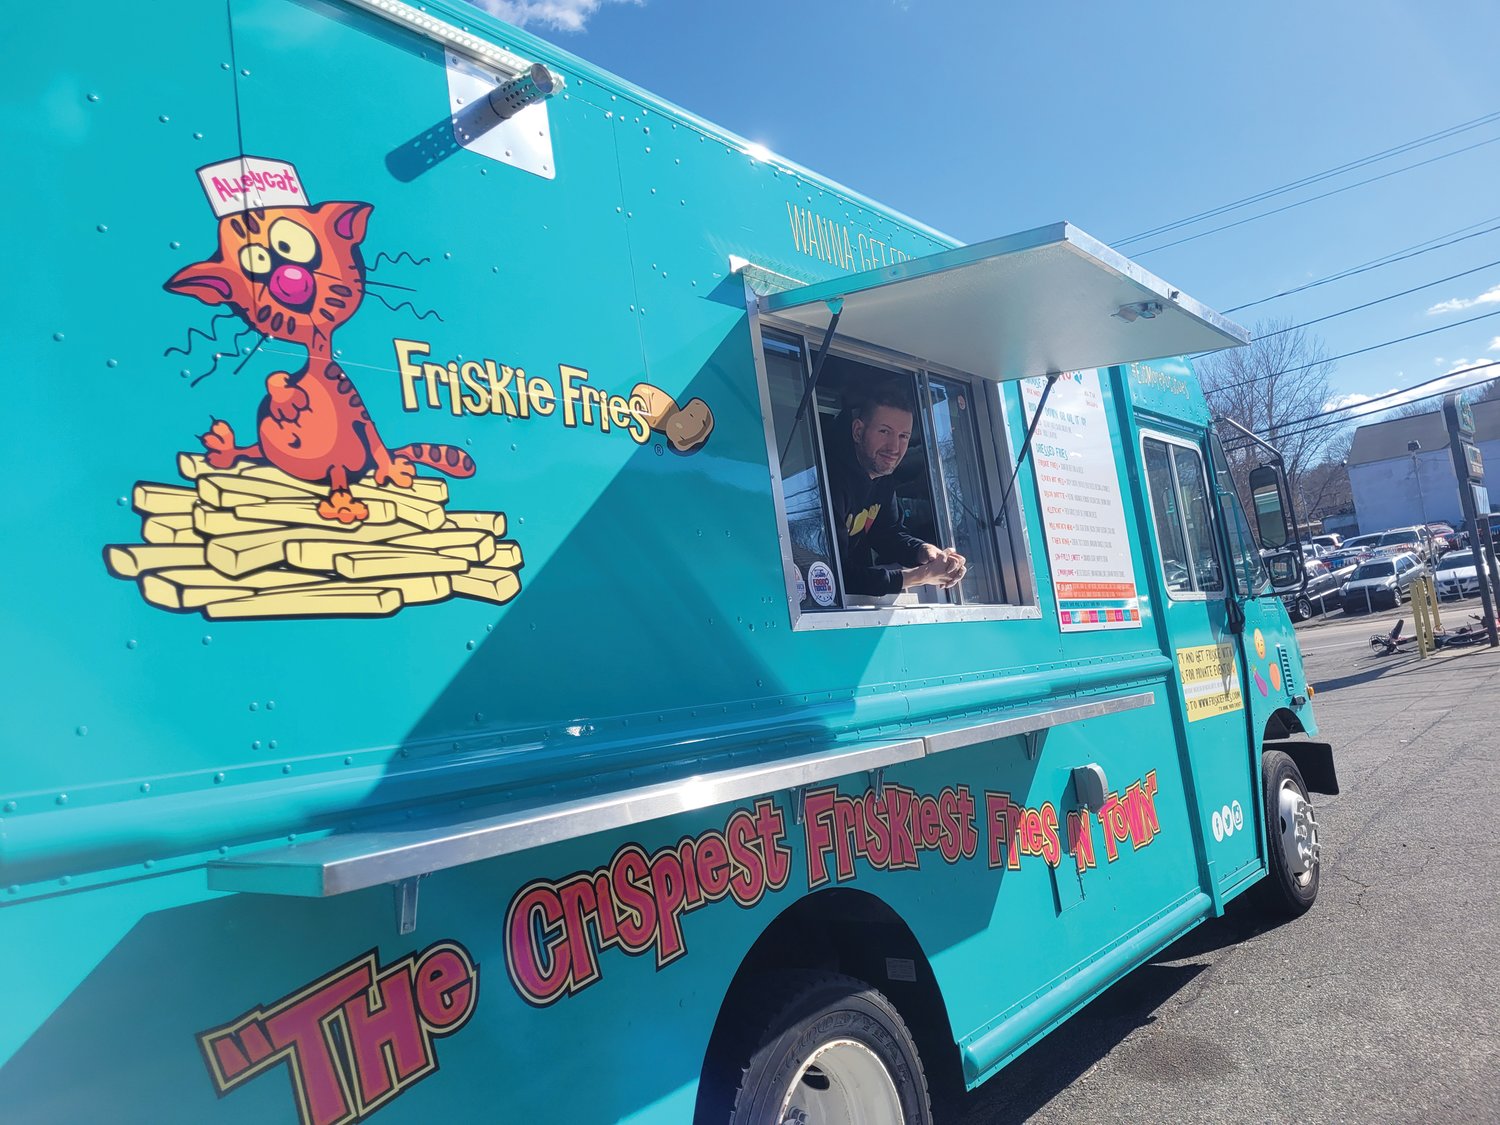 FRISKIE FOOD TRUCK: Rob Parrish works as food truck manager for Friskie Fries, a venture that began as a small fleet of food trucks and blossomed into a brick-and-mortar business with locations in Providence and Johnston. He welcomes the opportunity to bring Friskie Fries to more Johnston customers, via food truck.